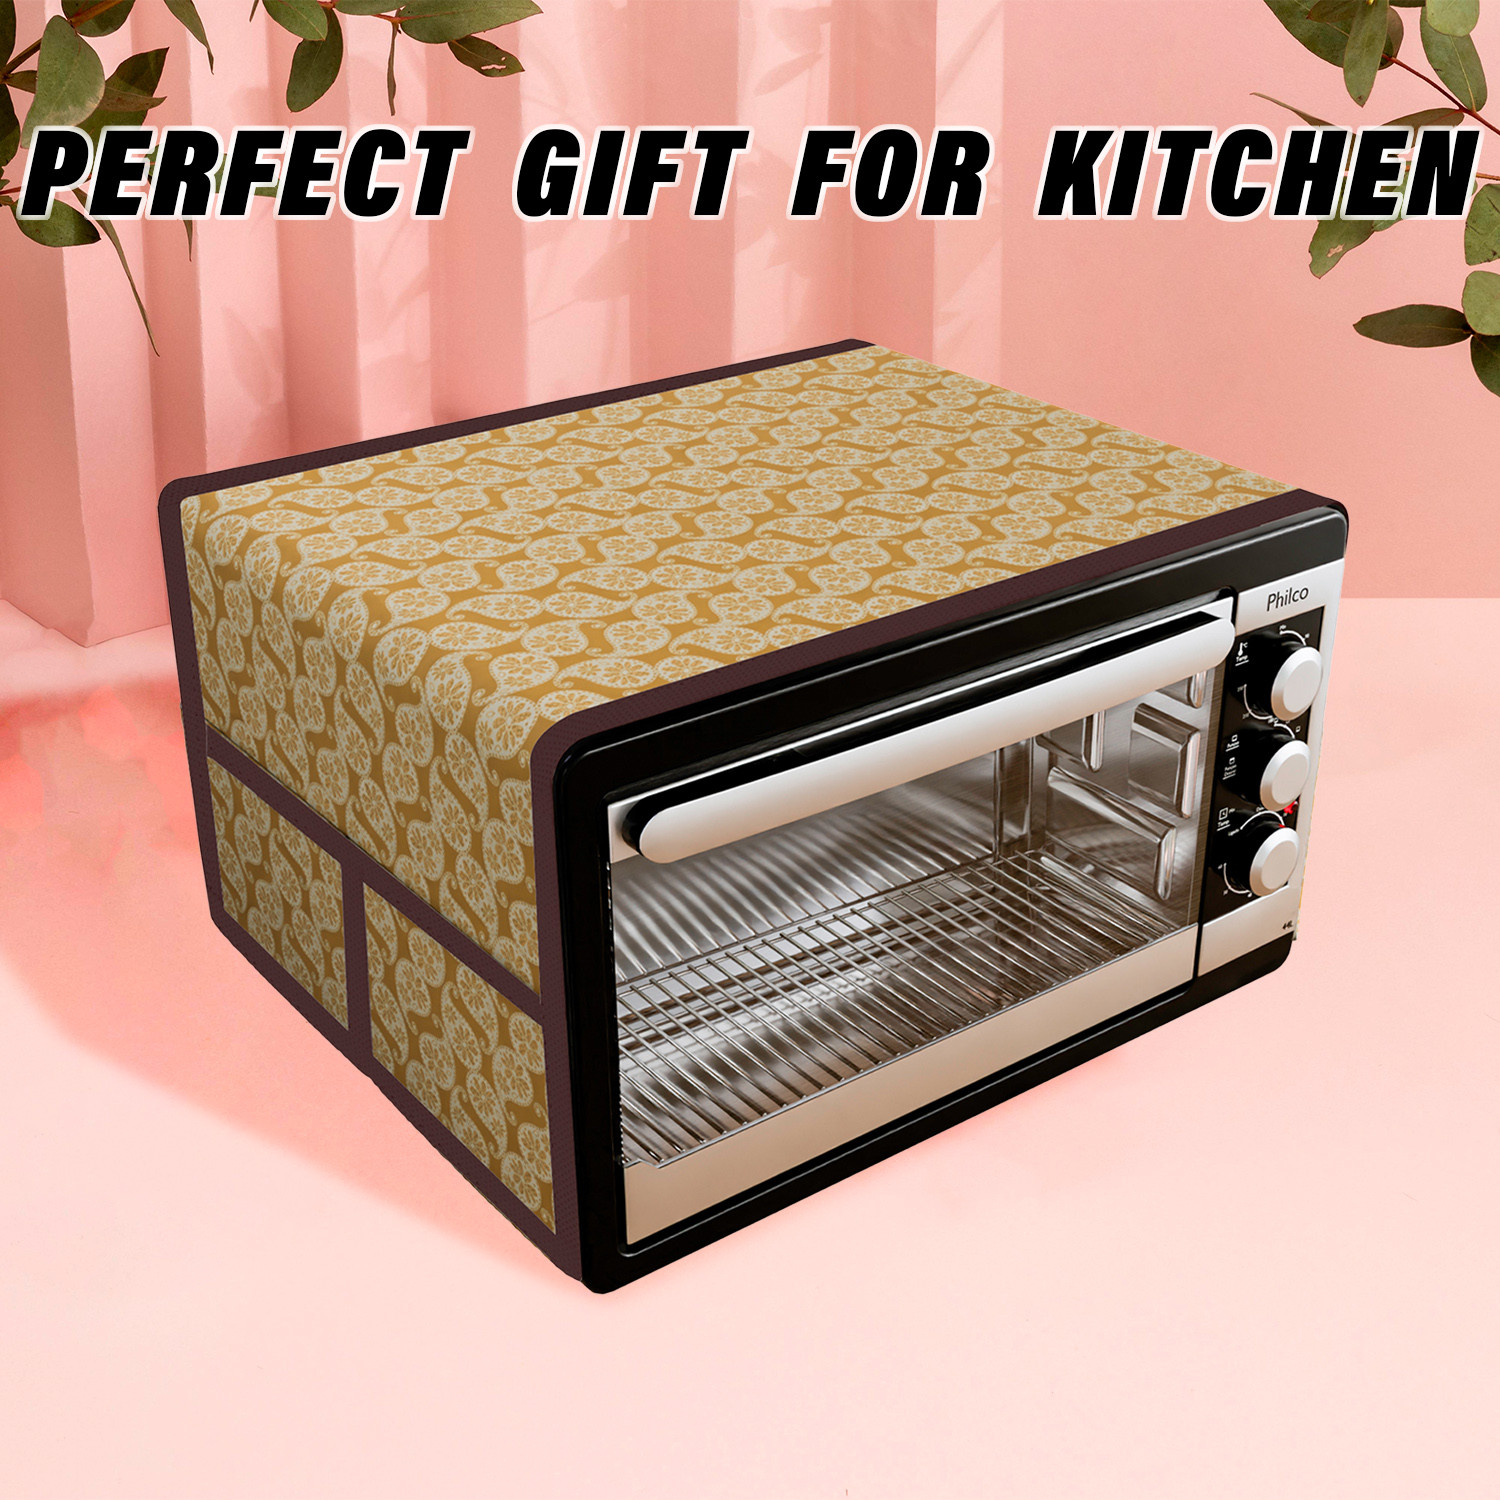 Kuber Industries Oven Top Cover | Microwave Oven Top Cover | Microwave Cover with 4 Utility Pockets | Oven Cover for Kitchen Décor | Carry Design Oven Top Cover | 40 LTR | Golden